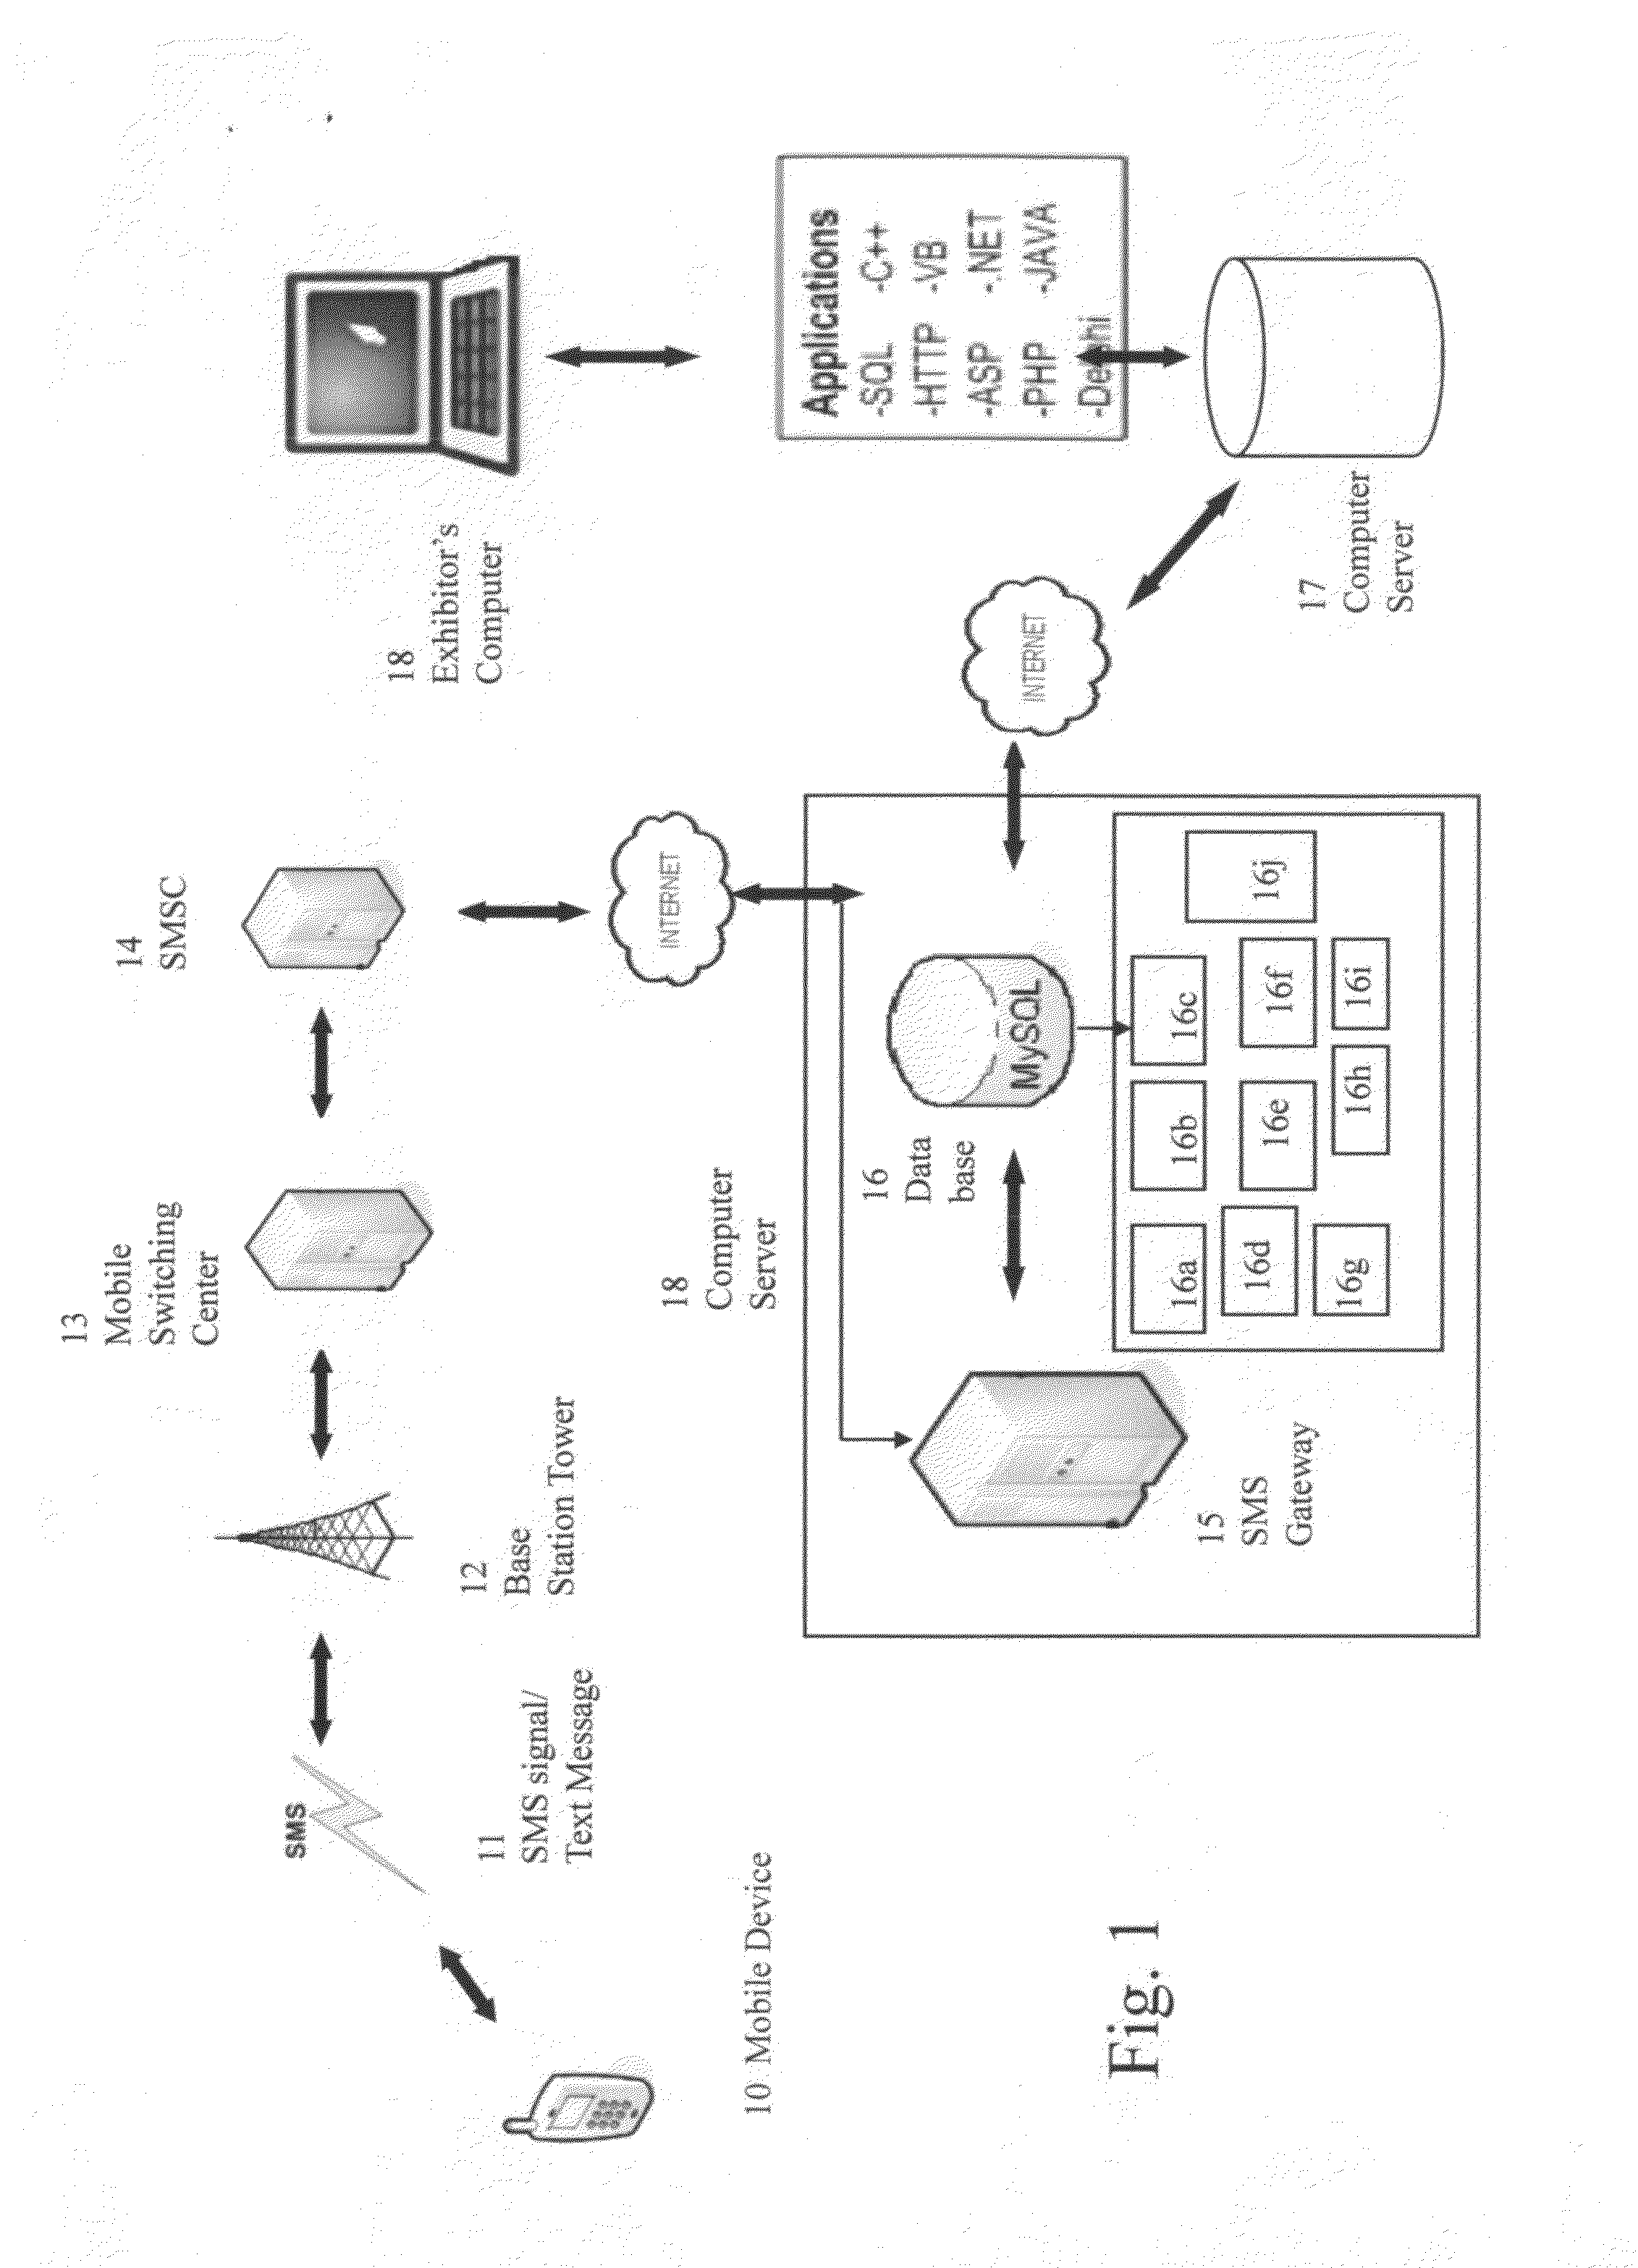 Method and system for capturing and displaying lead information